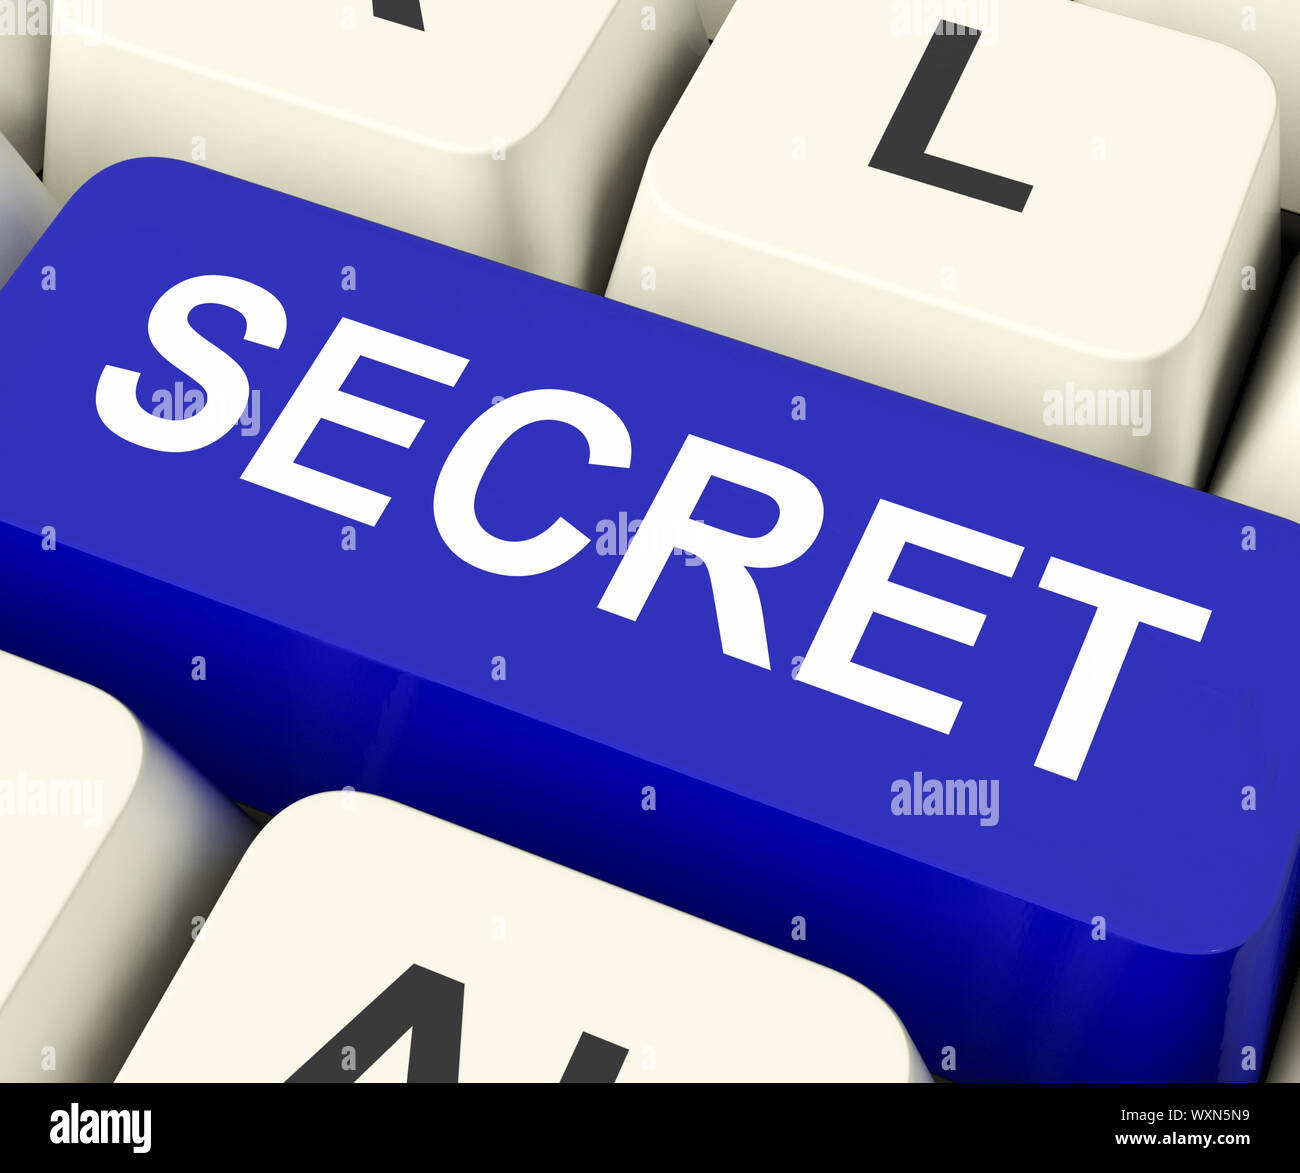 Secret Key On Keyboard Meaning Confidential Undisclosed Or Discreet Stock Photo